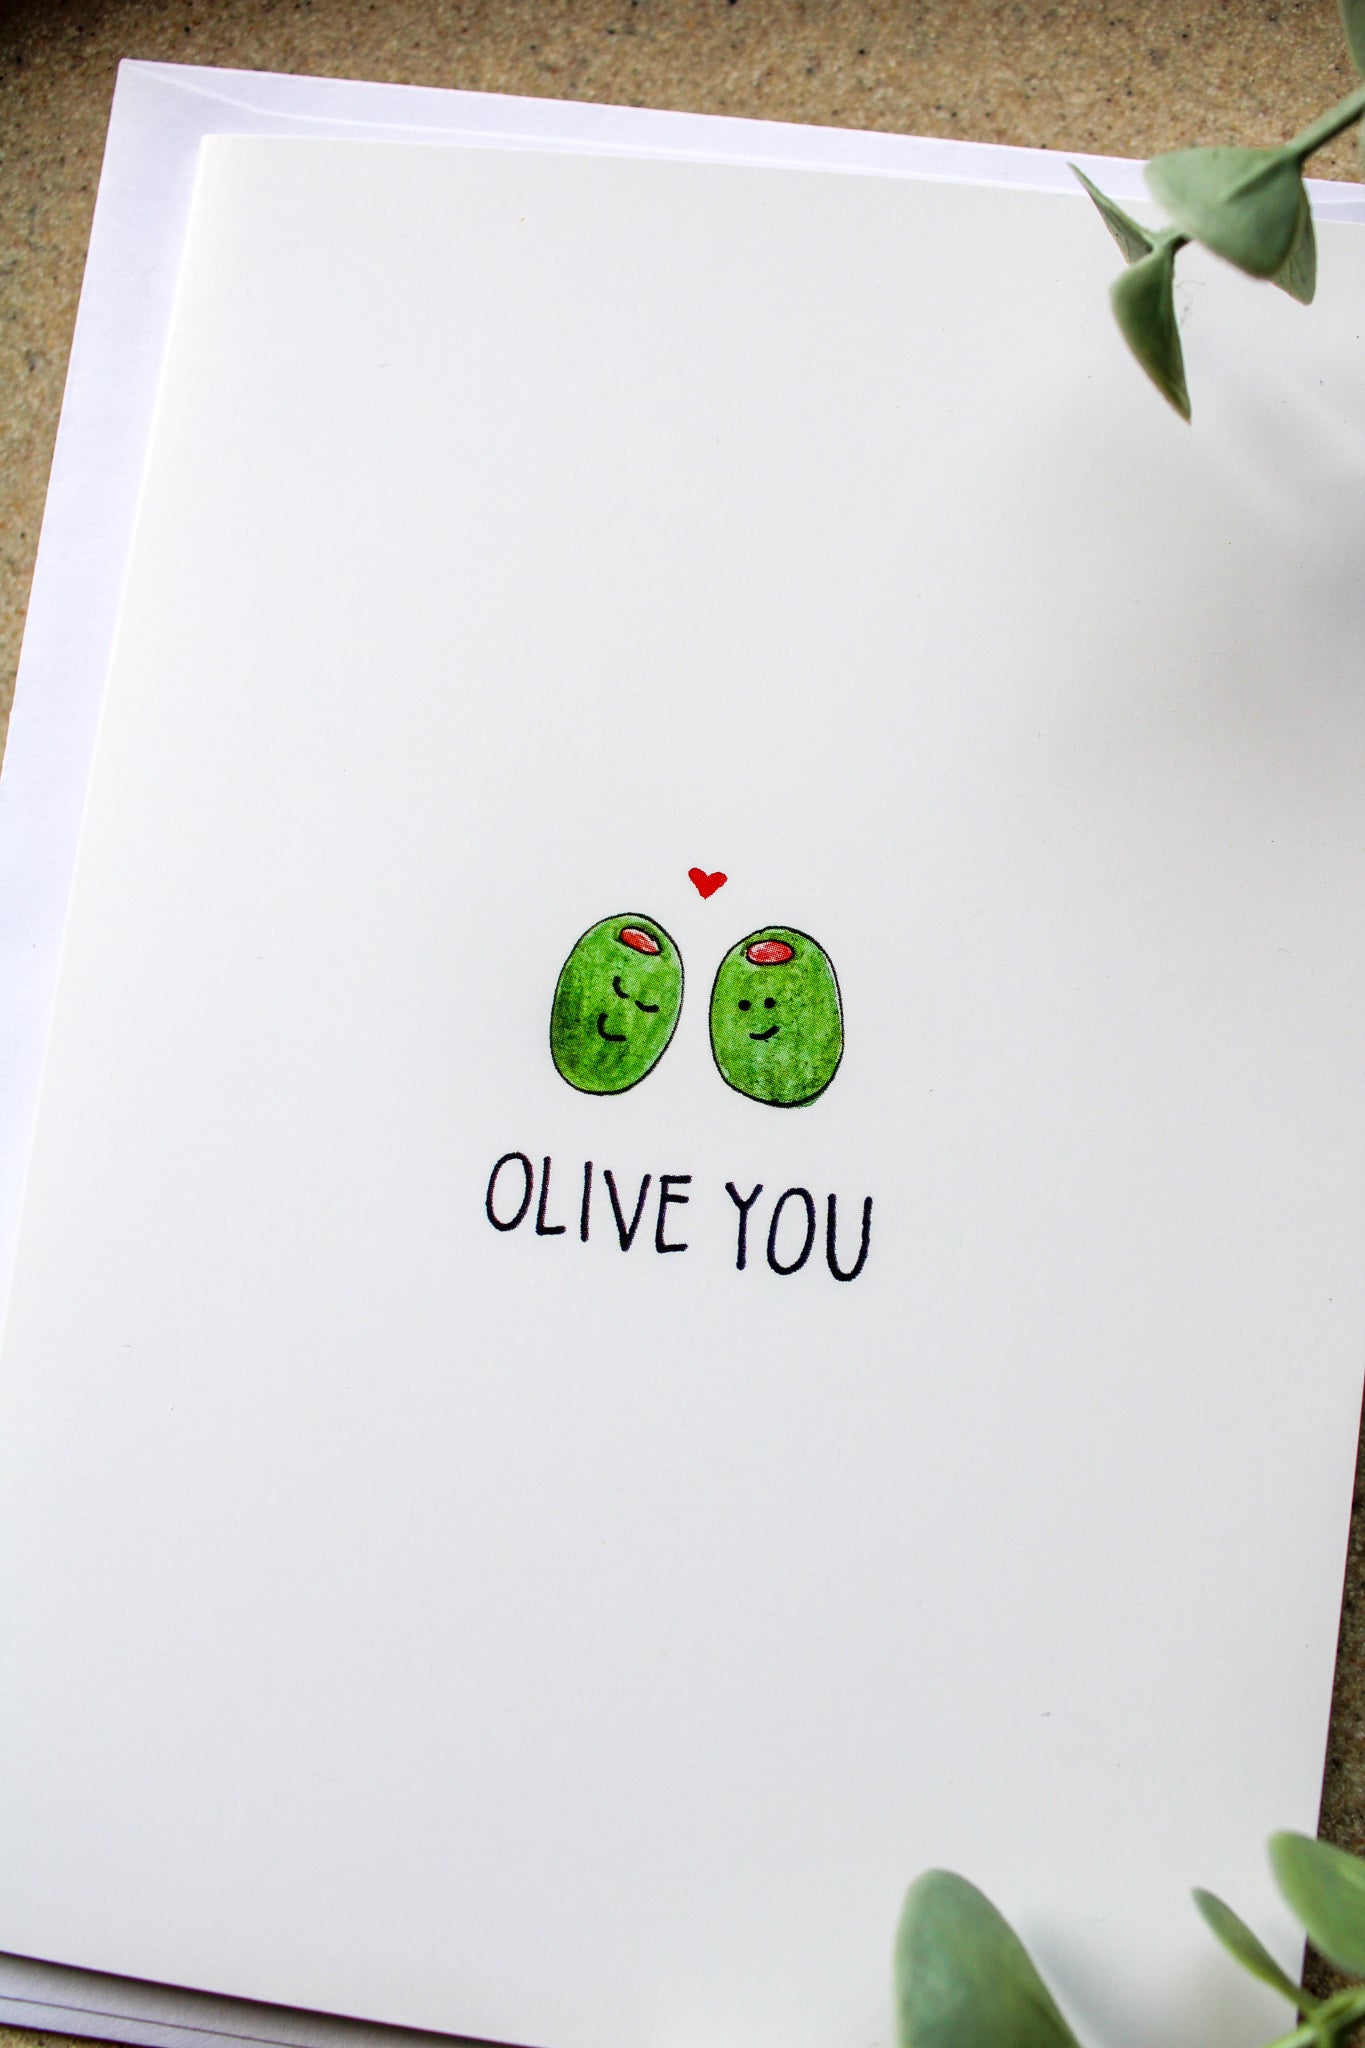 Olive You!